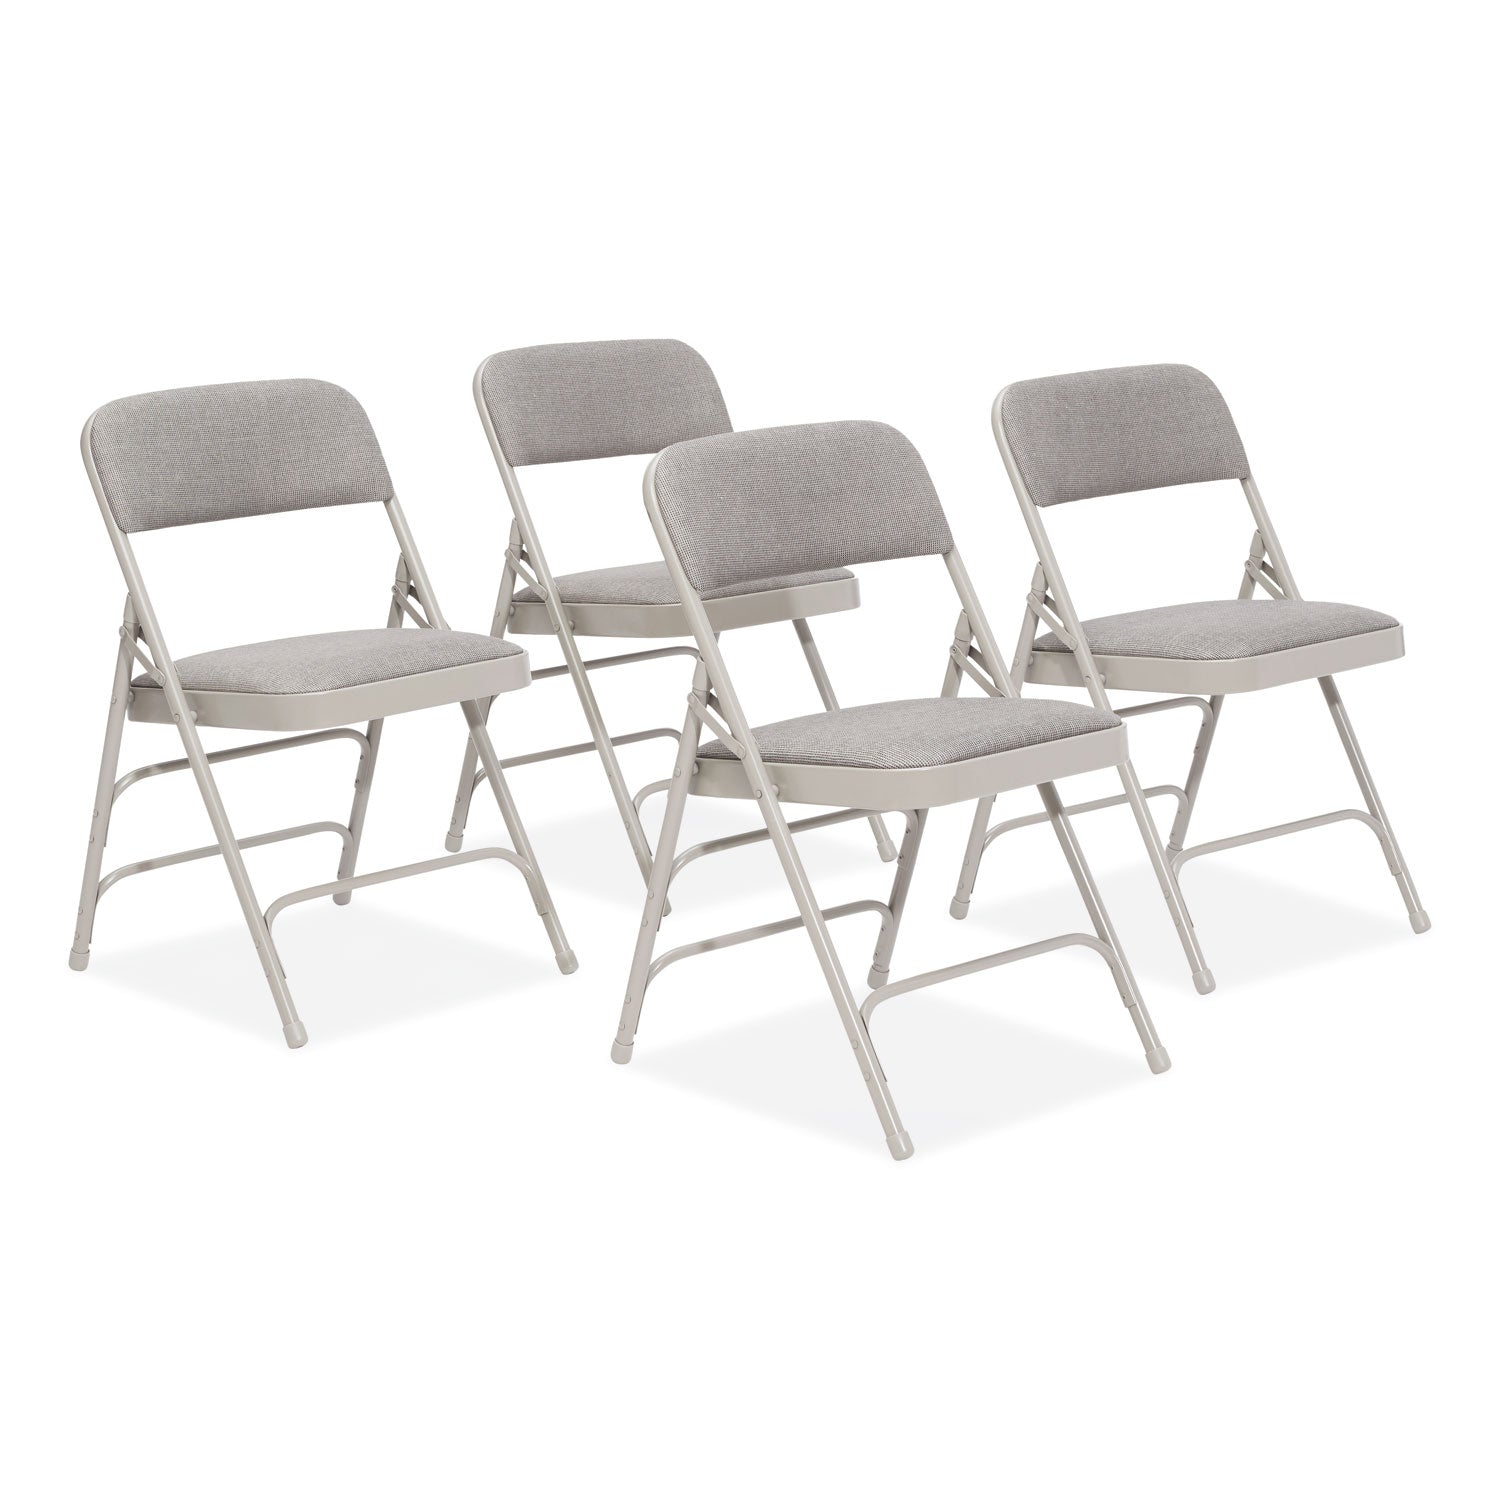 2300-series-fabric-triple-brace-double-hinge-premium-folding-chair-supports-500-lb-greystone-4-ct-ships-in-1-3-bus-days_nps2302 - 1